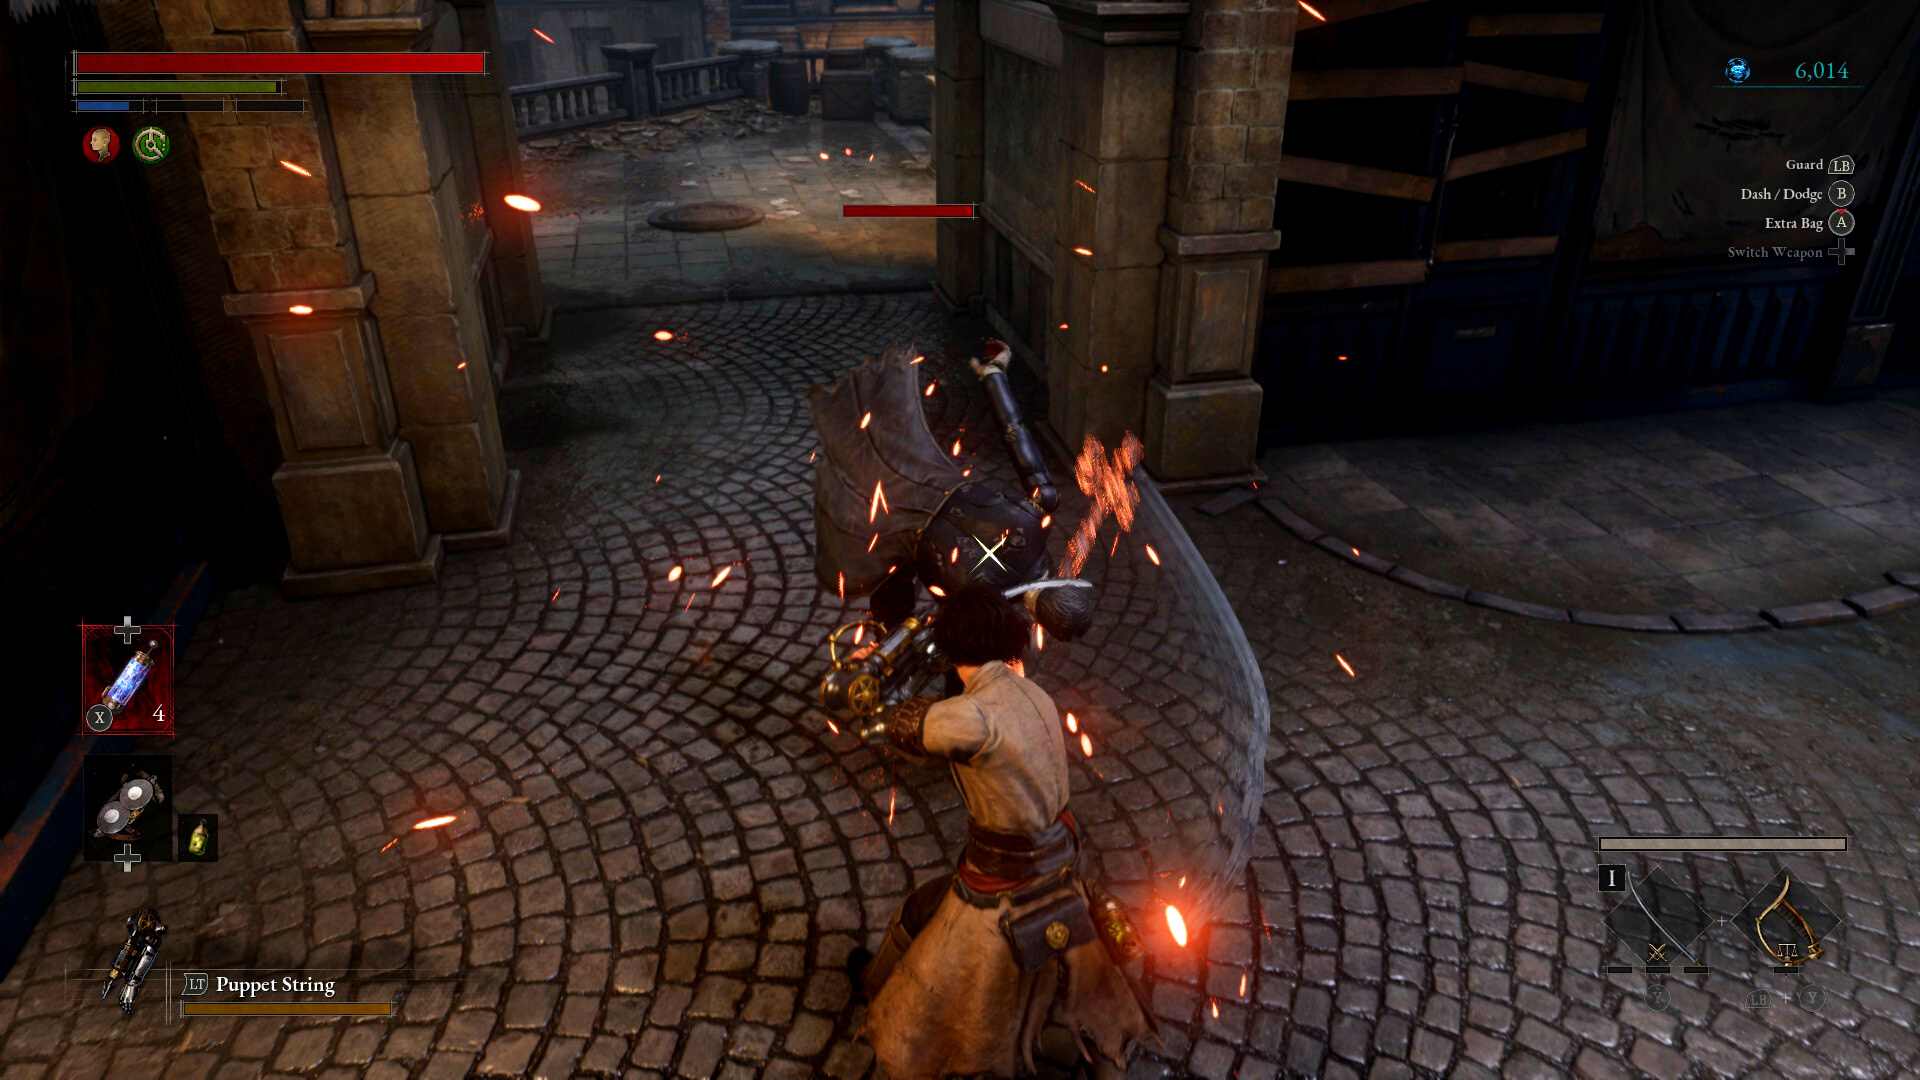 Combat in Lies of P is responsive, fluid, and features separate key bindings for guard and dodge.